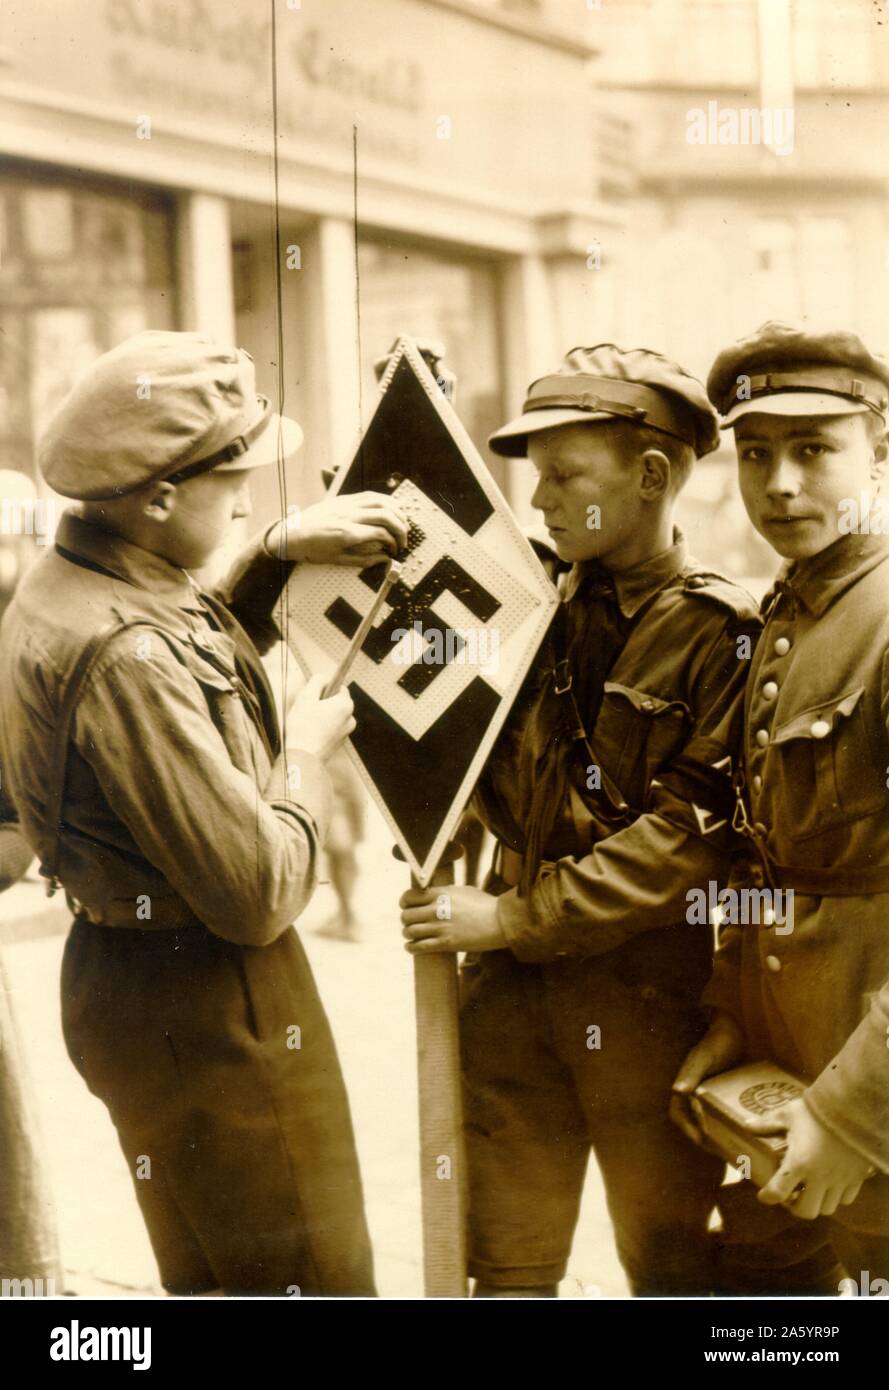 Three boys in the Hitler Youth, 1938. The Hitler Youth was the youth organisation of the Nazi Party in Germany. Its origins dated back to 1922. From 1933 until 1945, it was the sole official youth organization in Germany and was partially a paramilitary organisation. Stock Photo